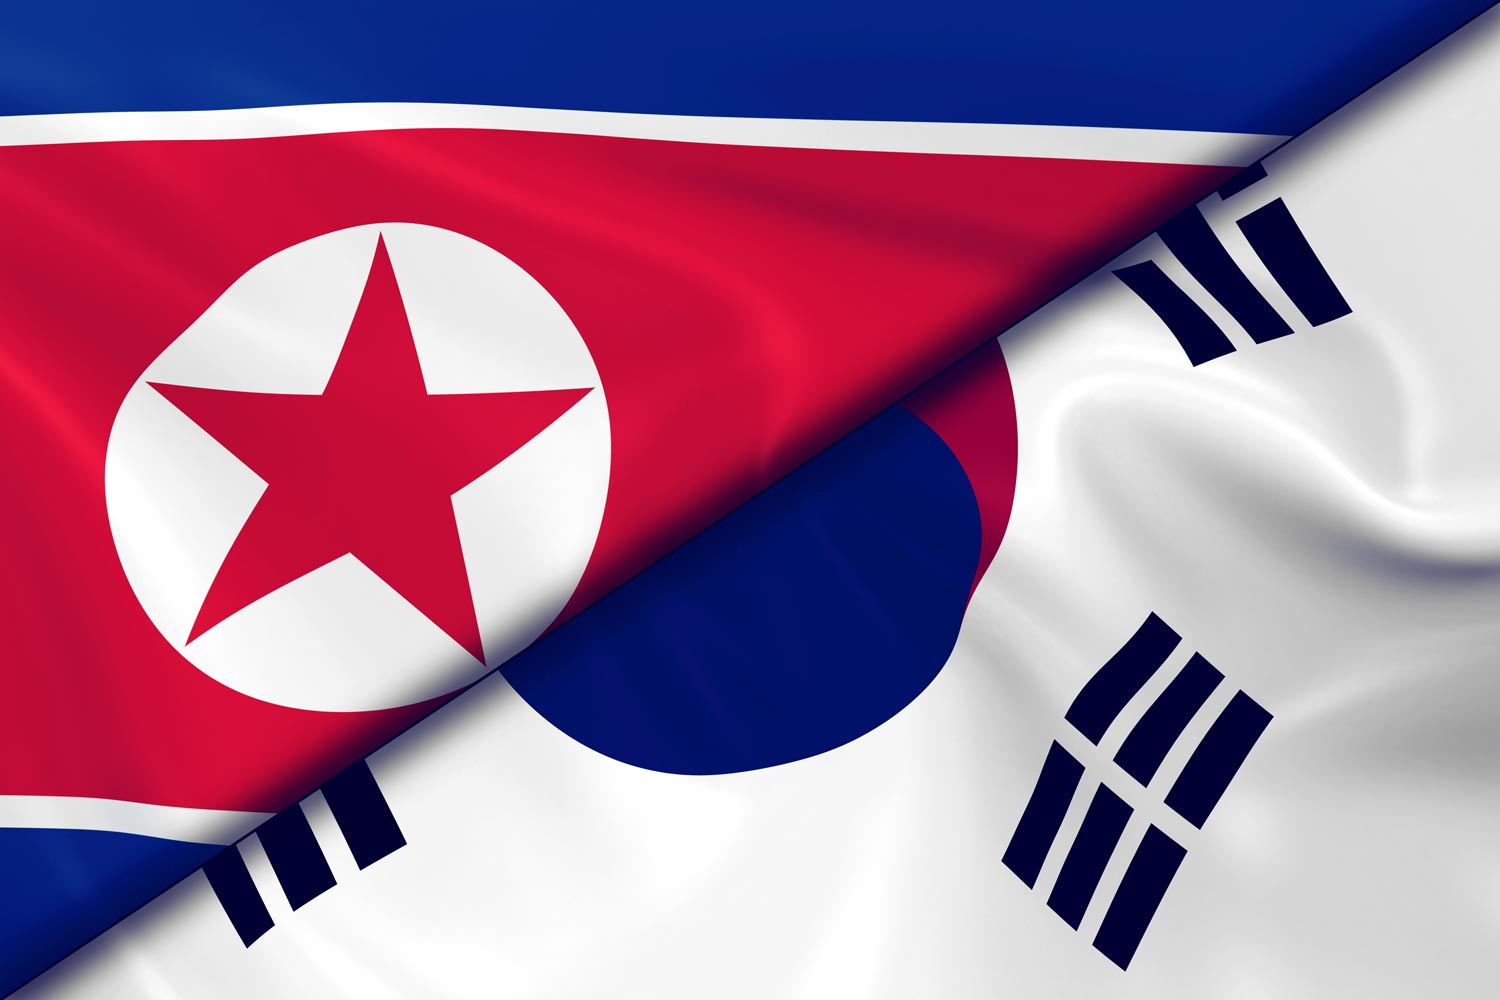 The flags of South Korea and North Korea combined. 